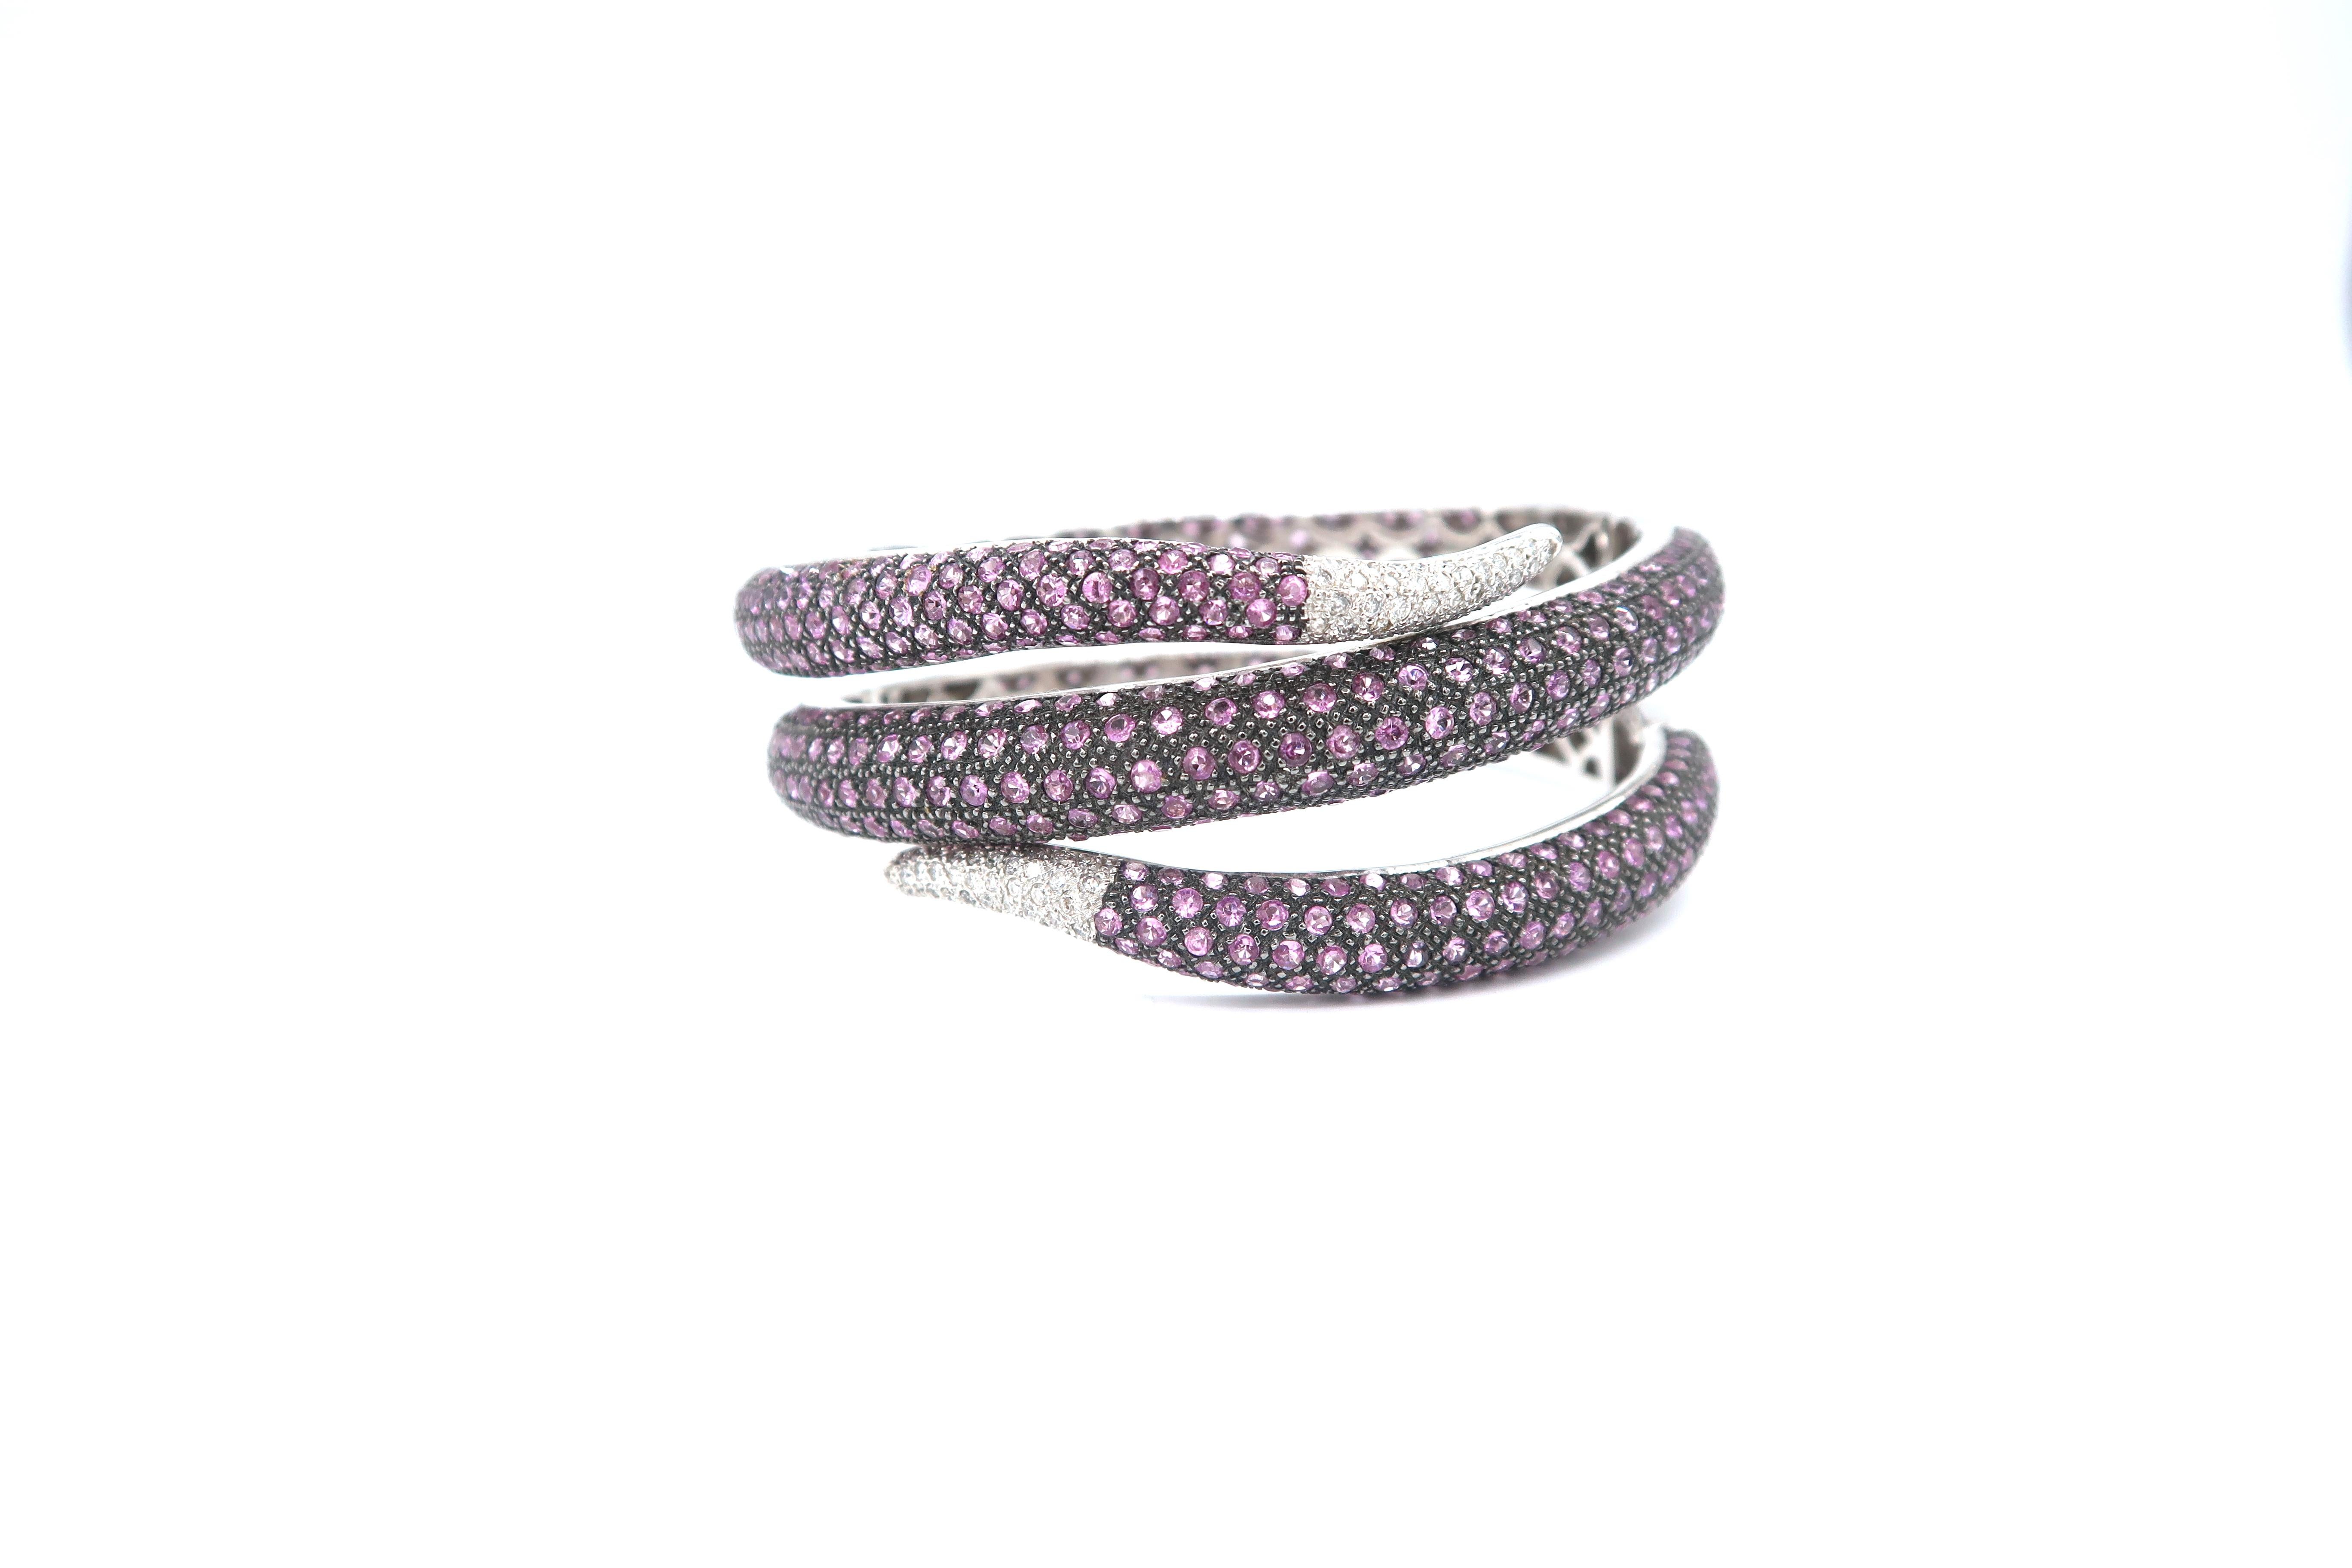 Serpentine Pink Sapphire and Diamond Pavé Hinged Cuff Bangle in 18K White Gold

Pink Sapphire: 23.62cts.
Diamond: 0.70ct.
Gold: 18K White Gold 99.852g.